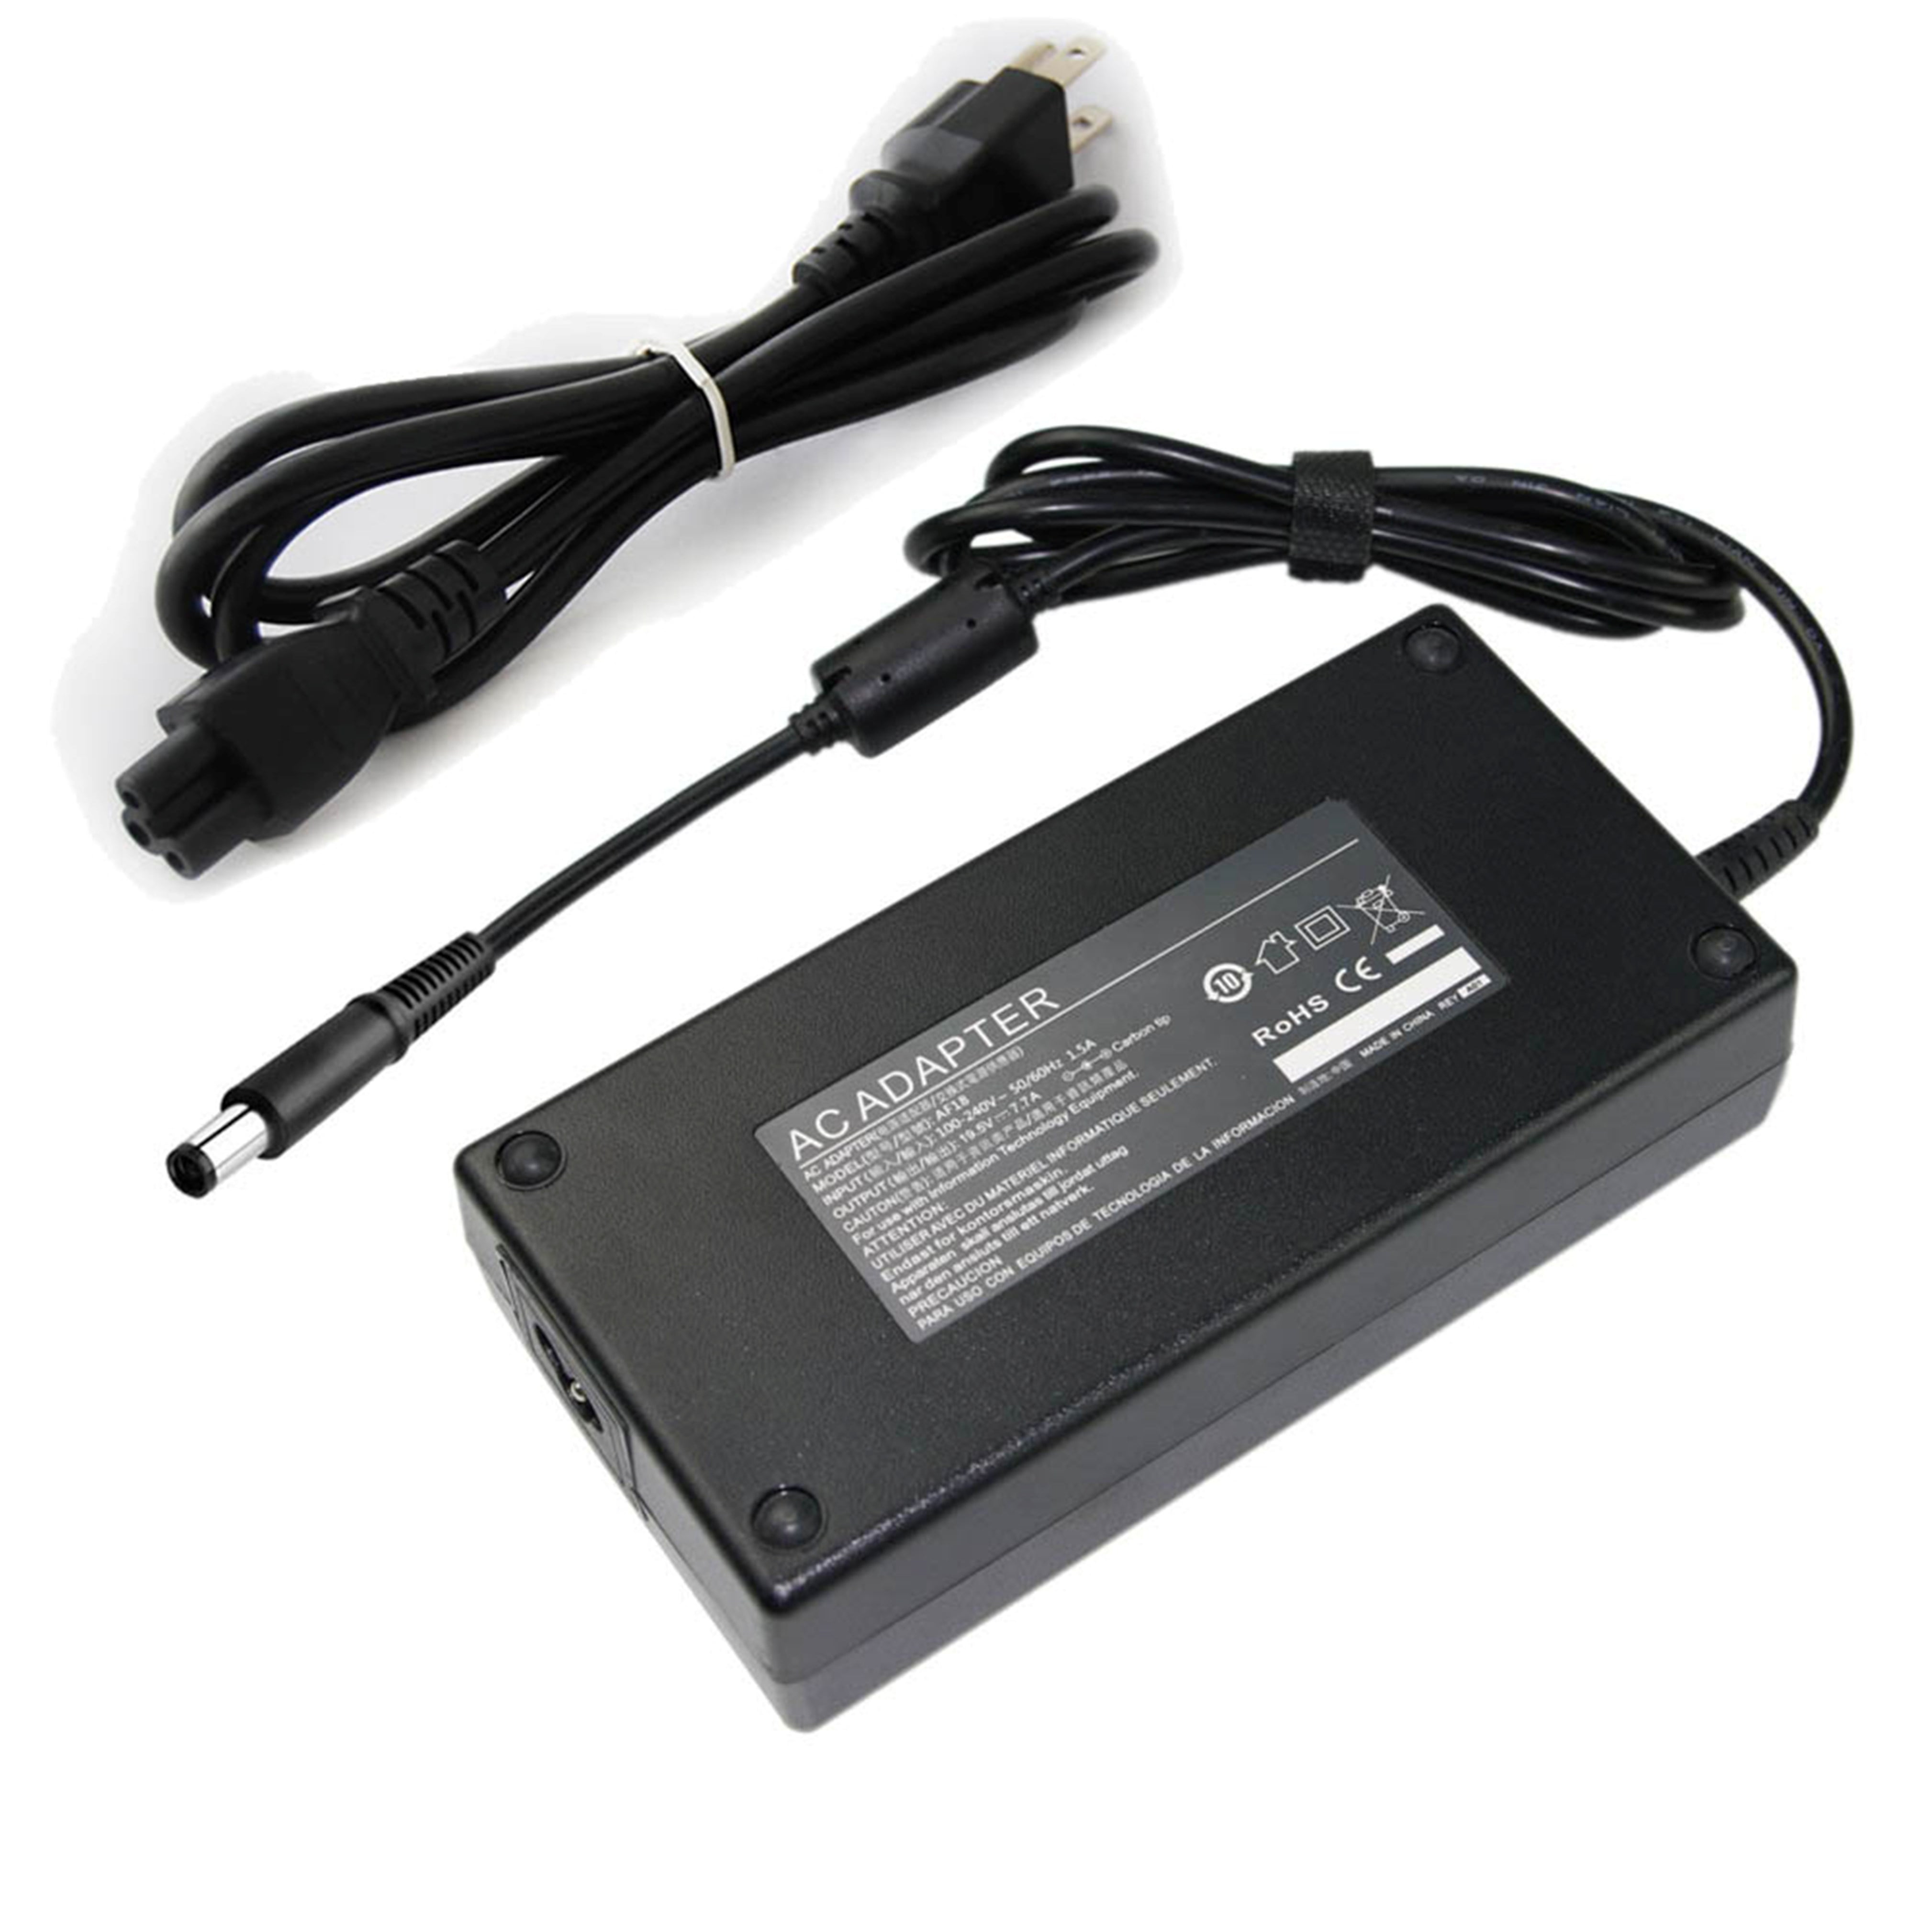 Alienware NEW GENUINE DELL PA-5M10 ALIENWARE M15x M14x XPS17 AC ADAPTER CHARGER 150W J408P 